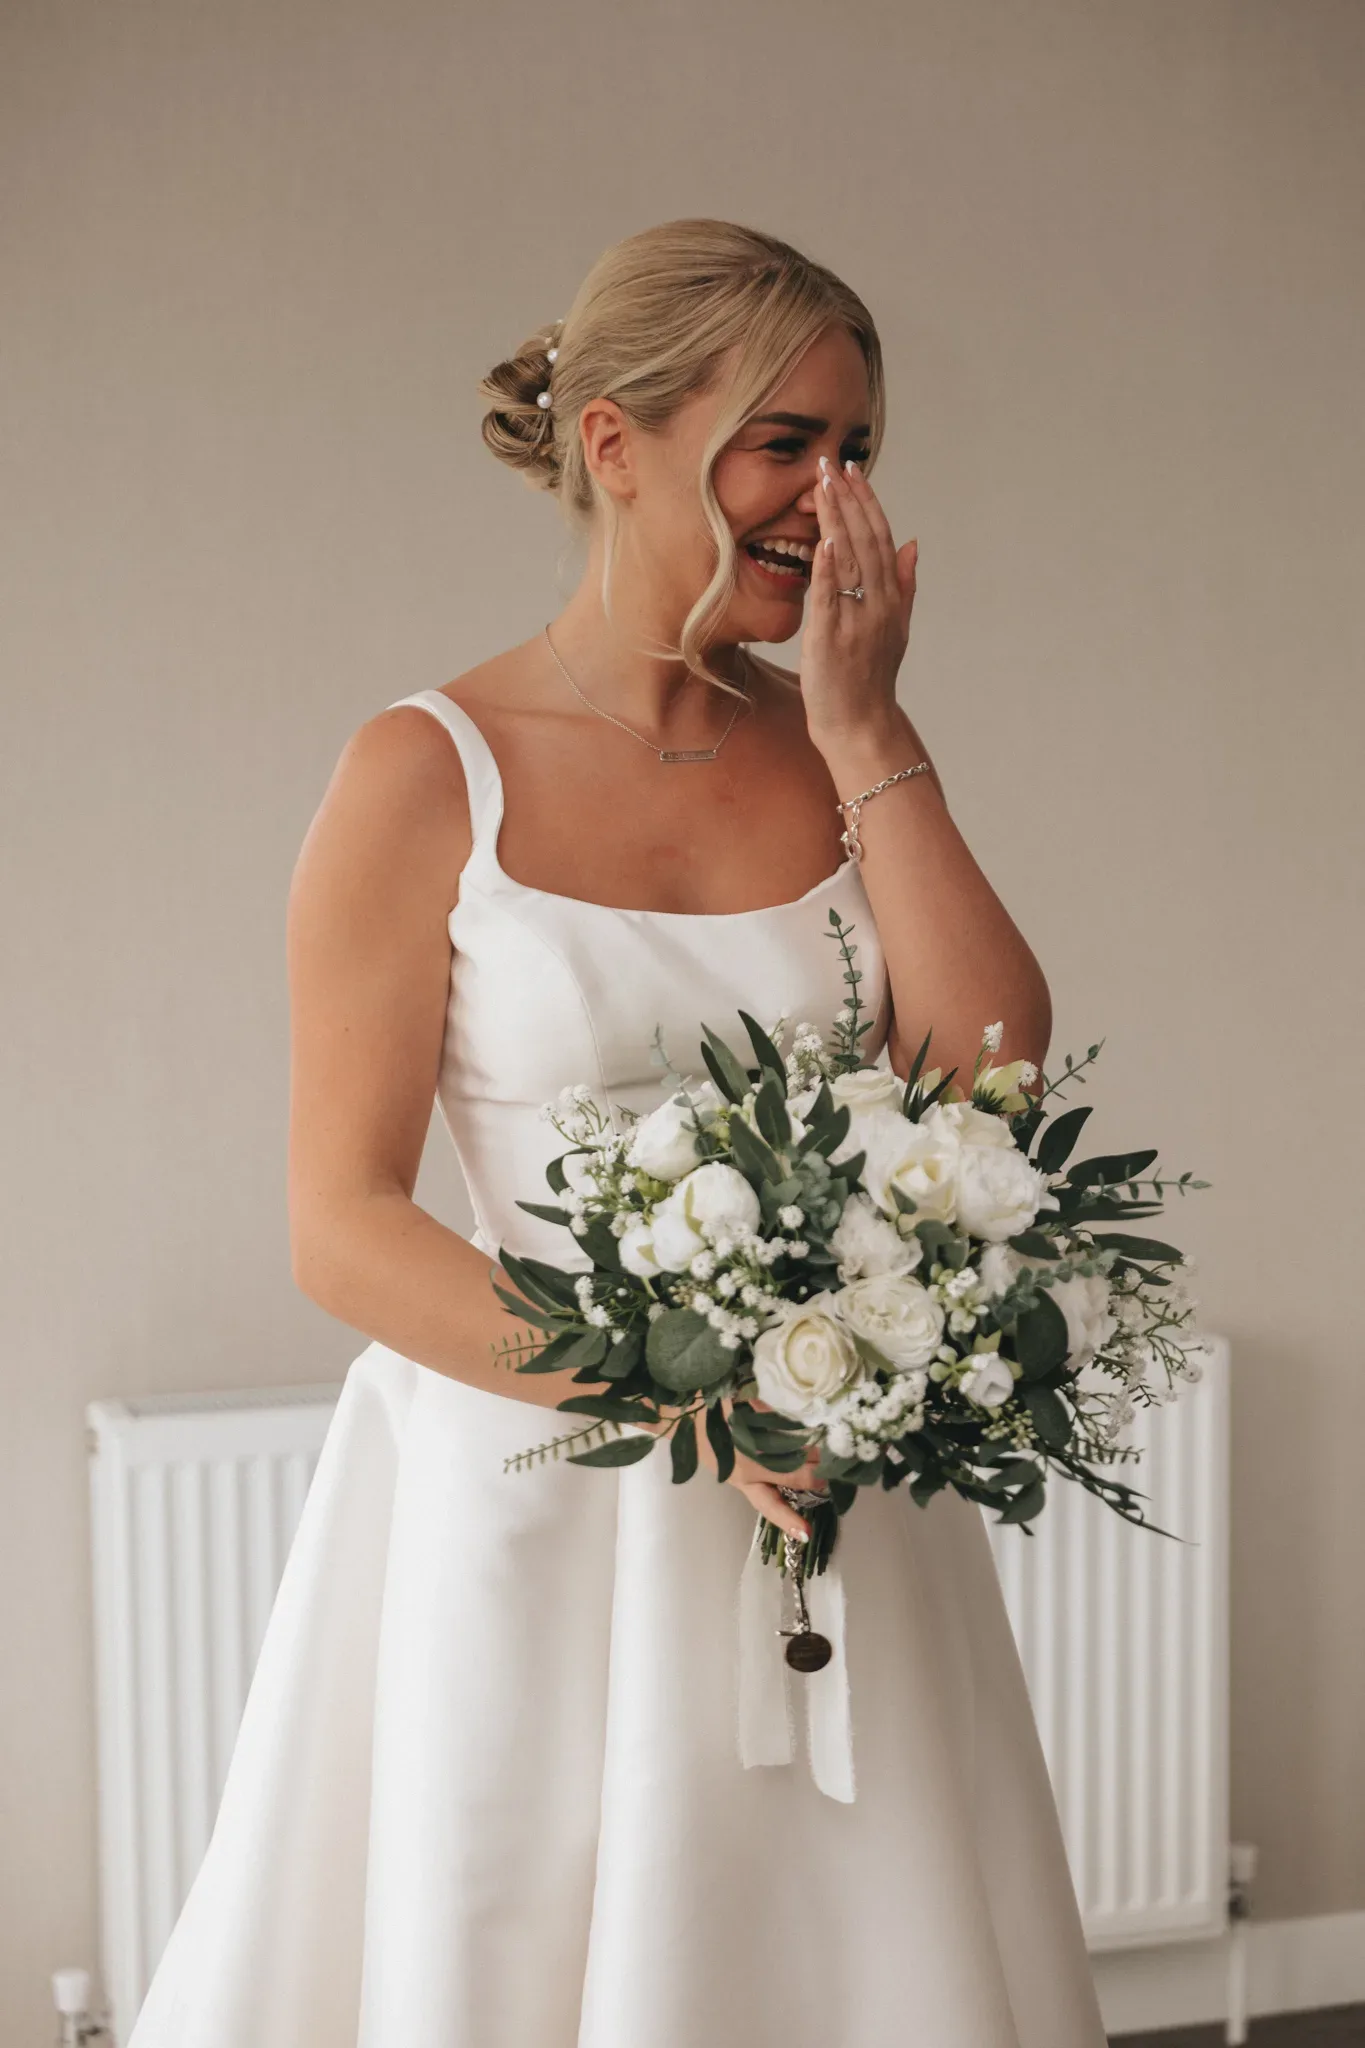 A bride in a white dress with spaghetti straps holds a bouquet of white flowers and greenery, looking emotional and wiping tears from her face, standing indoors with a neutral background.